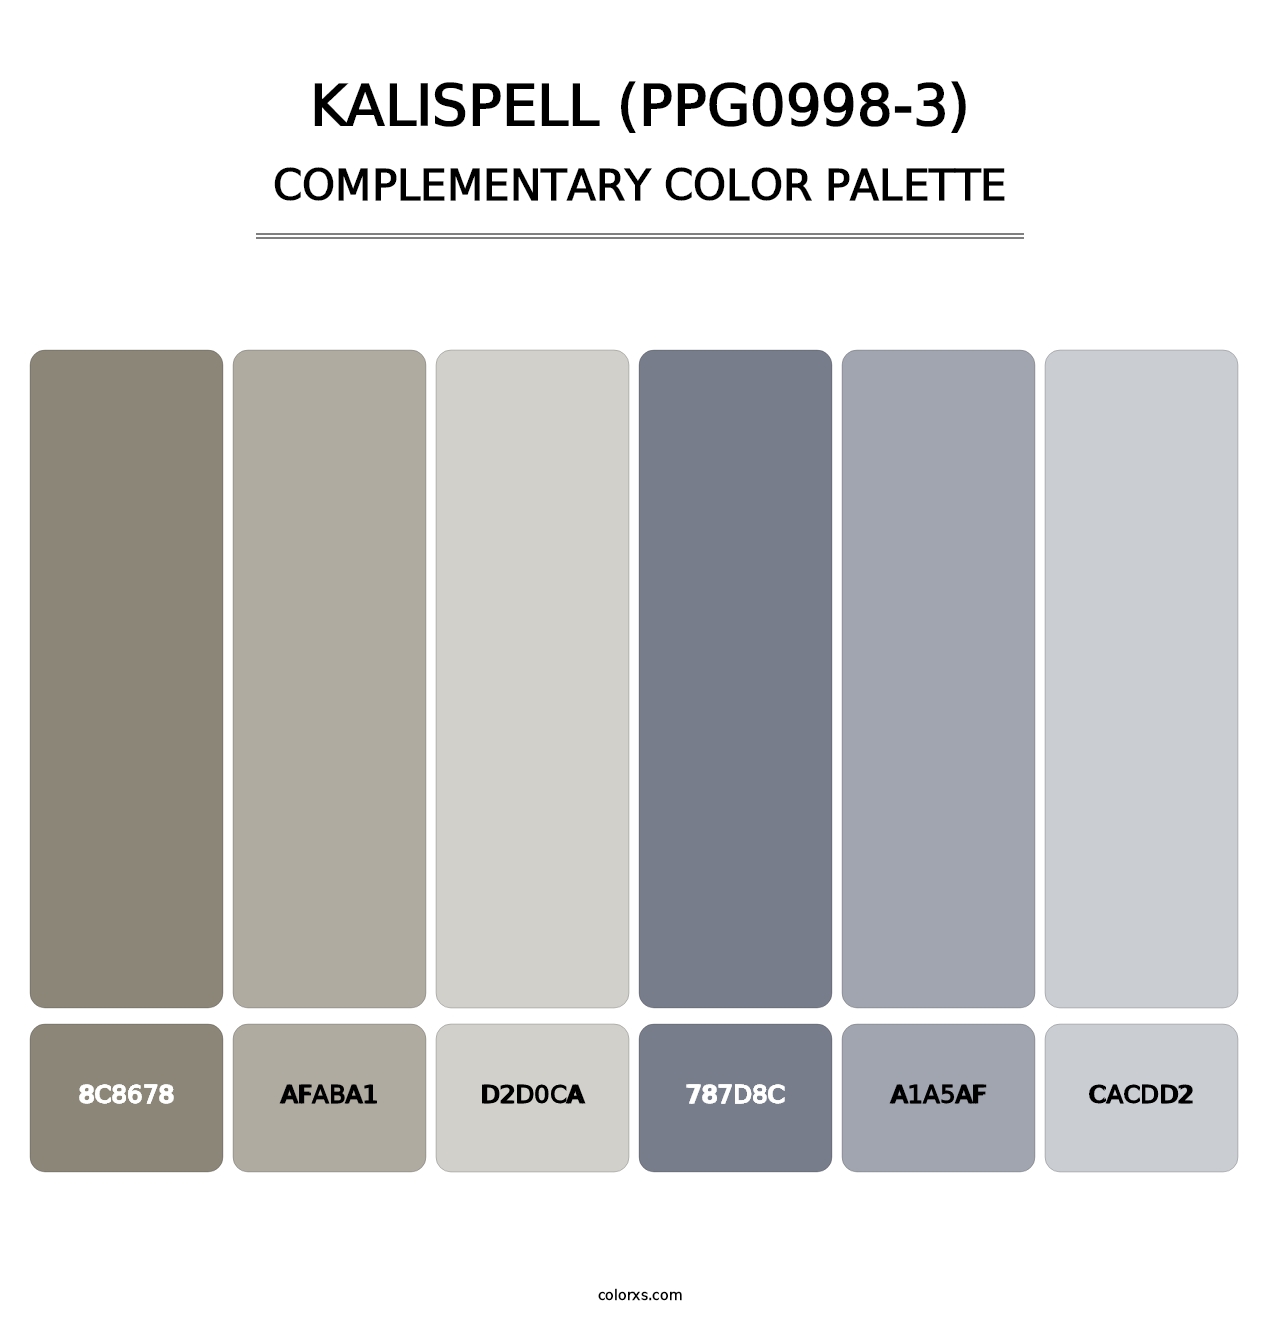 Kalispell (PPG0998-3) - Complementary Color Palette